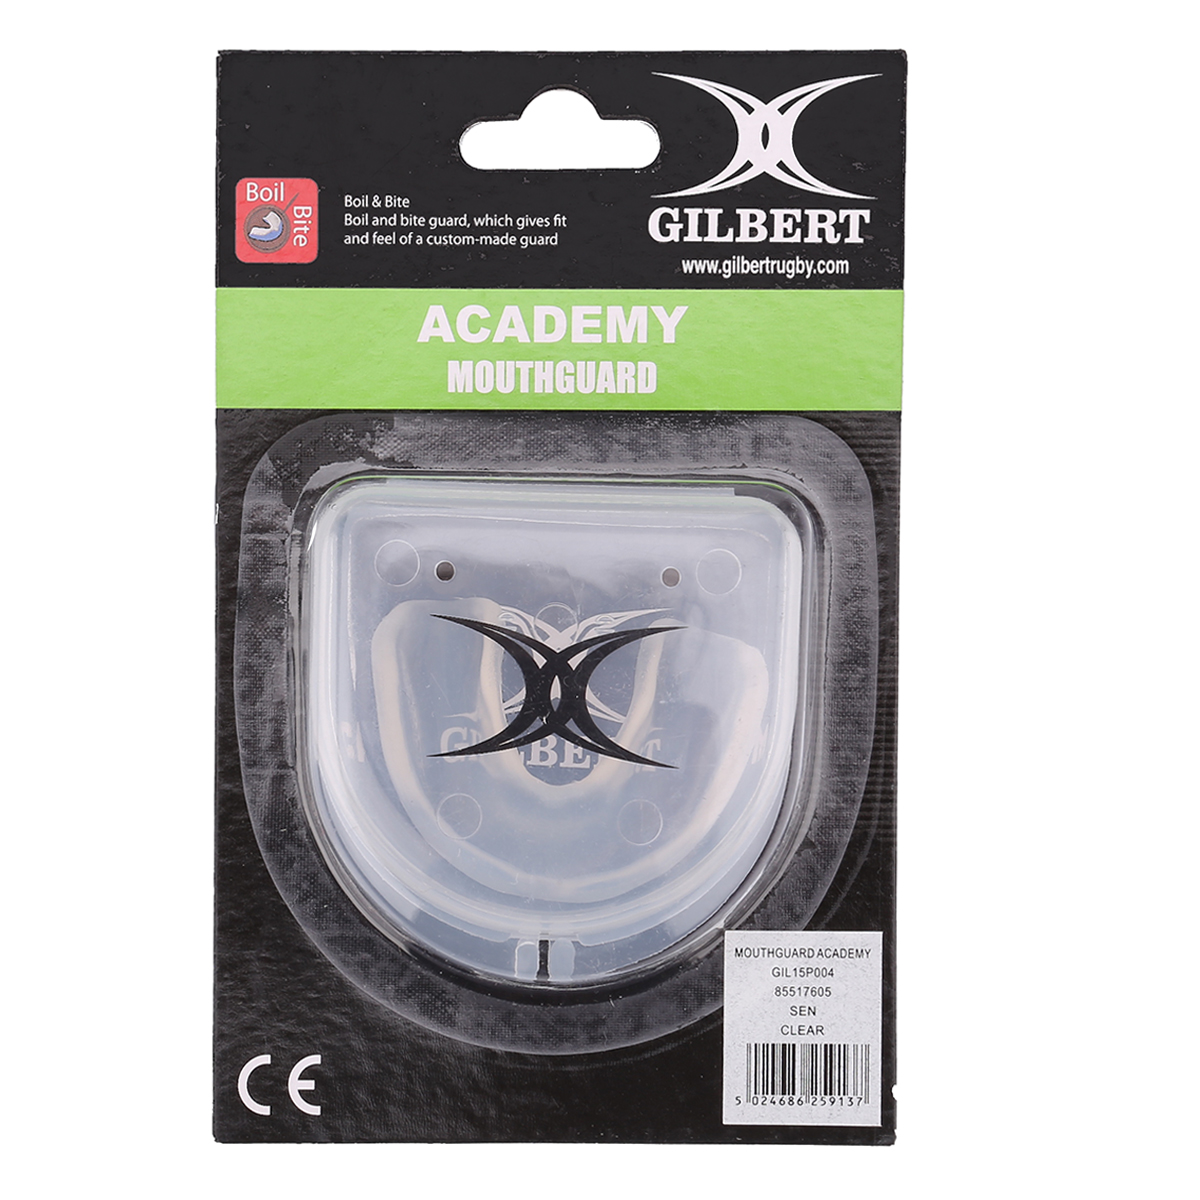 Protector bucal Gilbert Mouthguard Academy,  image number null